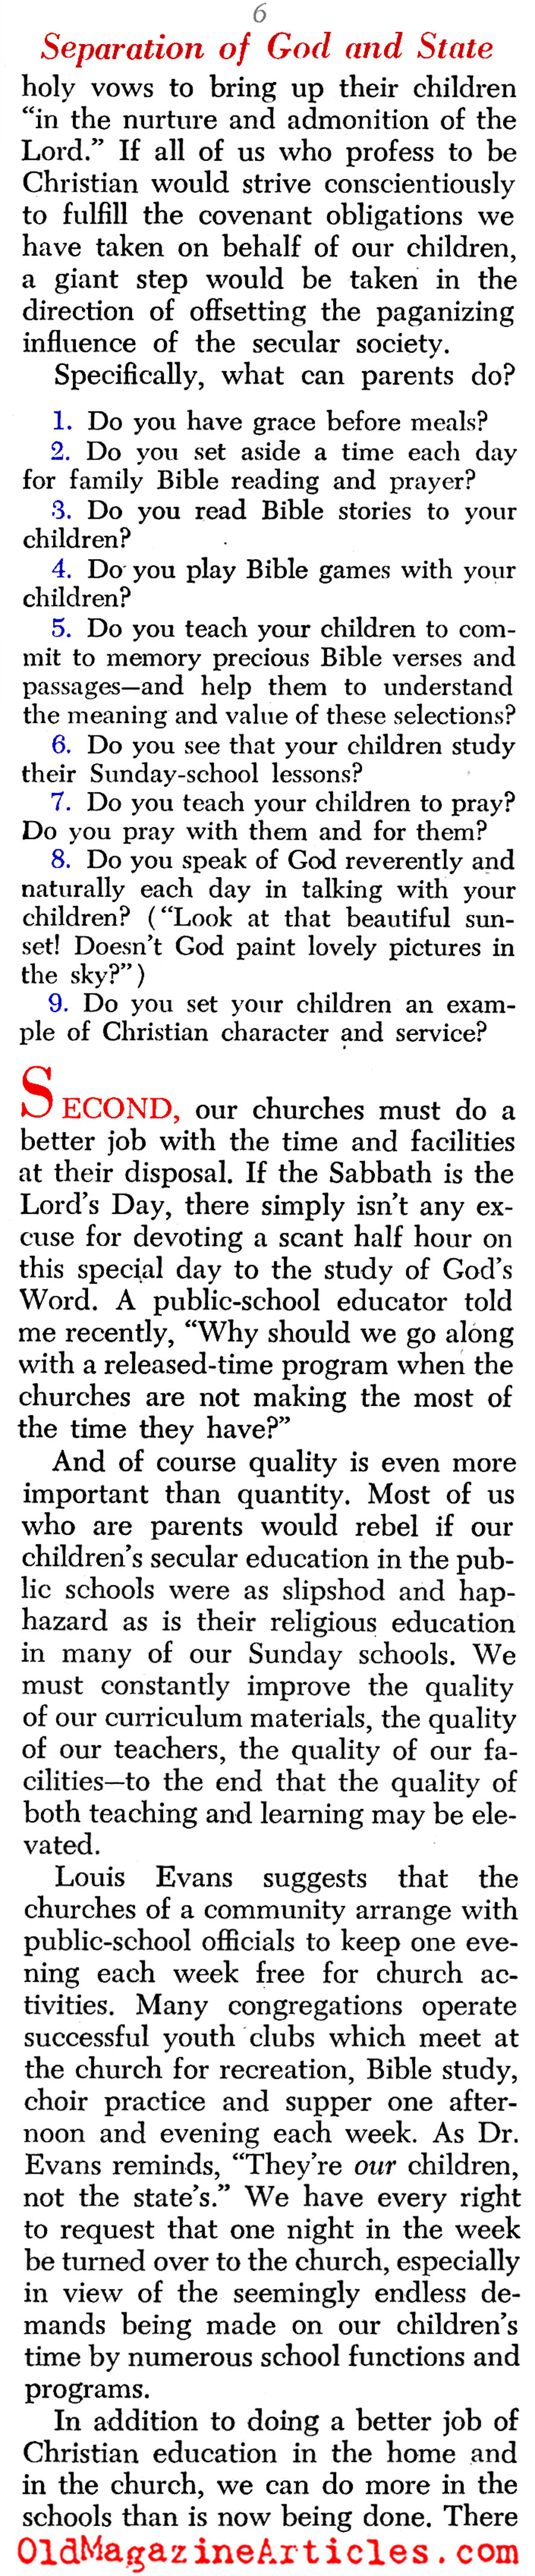 ''The Separation of God and State'' (Christian Herald, 1963)